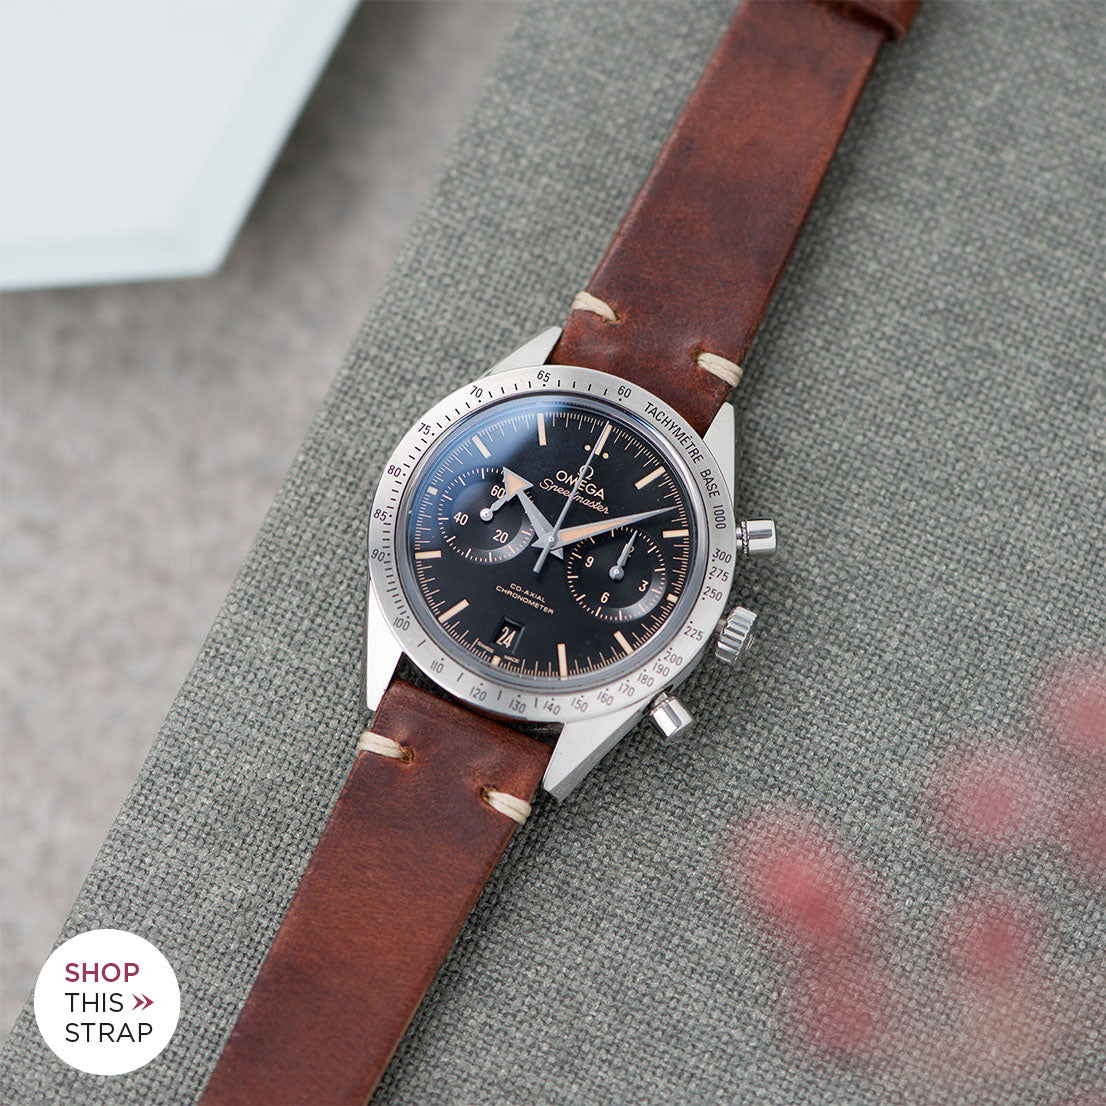 Bulang and Sons_Strap Guide_The Omega Speedmaster ’57 Co-Axial Chronograph_Siena Brown Leather Watch Strap